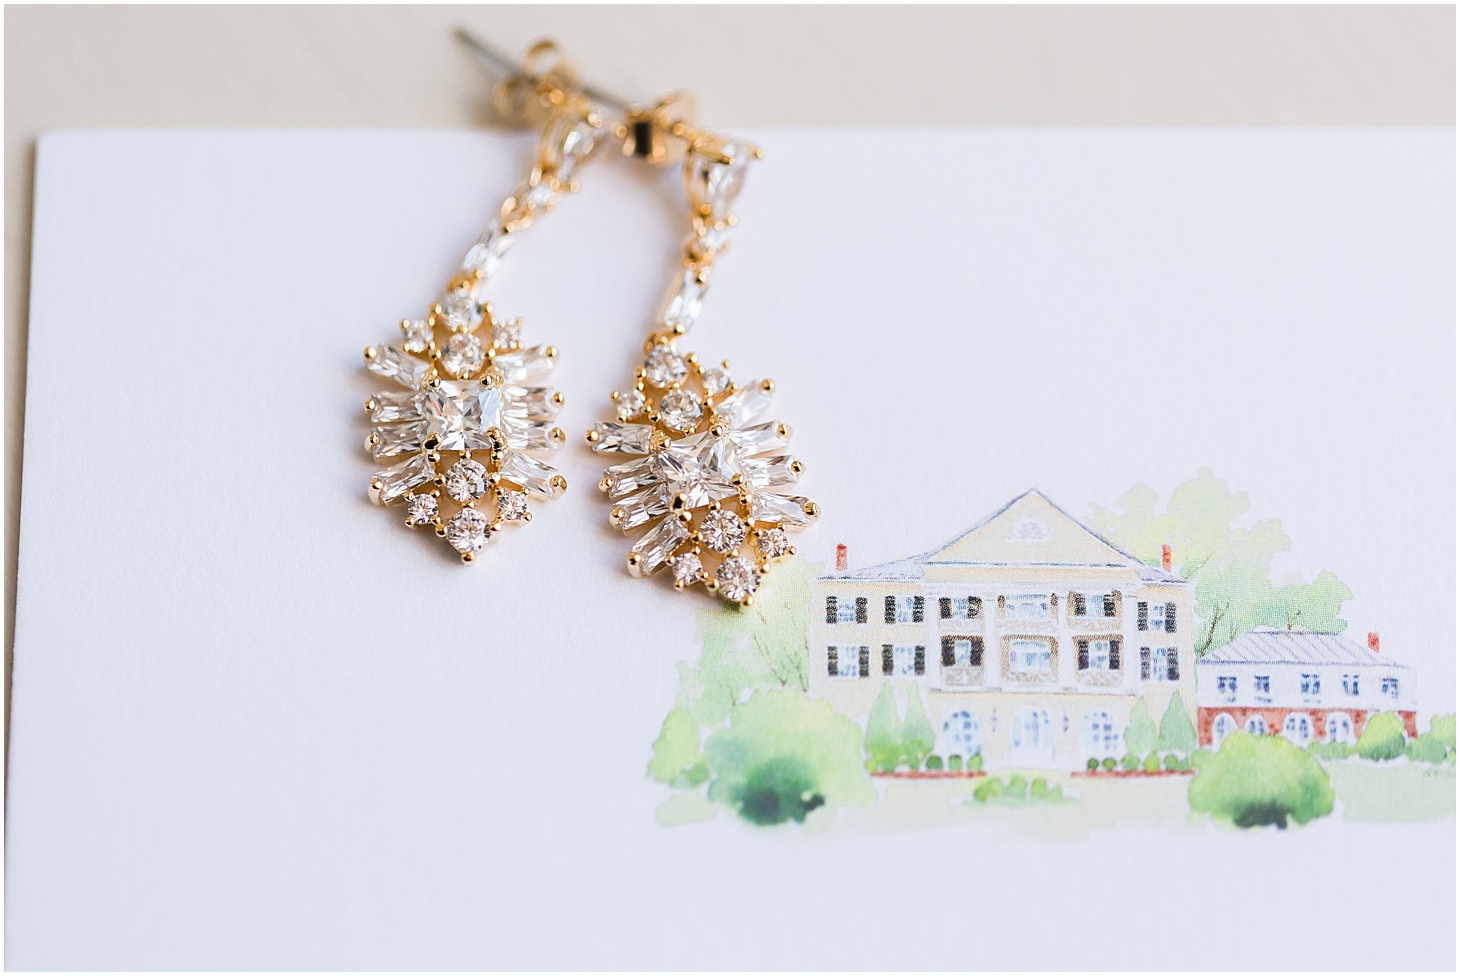 Brie's Gold and Crystal Earrings, Green and White Summer Wedding at The Inn at Willow Grove, Ceremony at St. Isidore the Farmer Catholic Church, Sarah Bradshaw Photography, DC Wedding Photographer